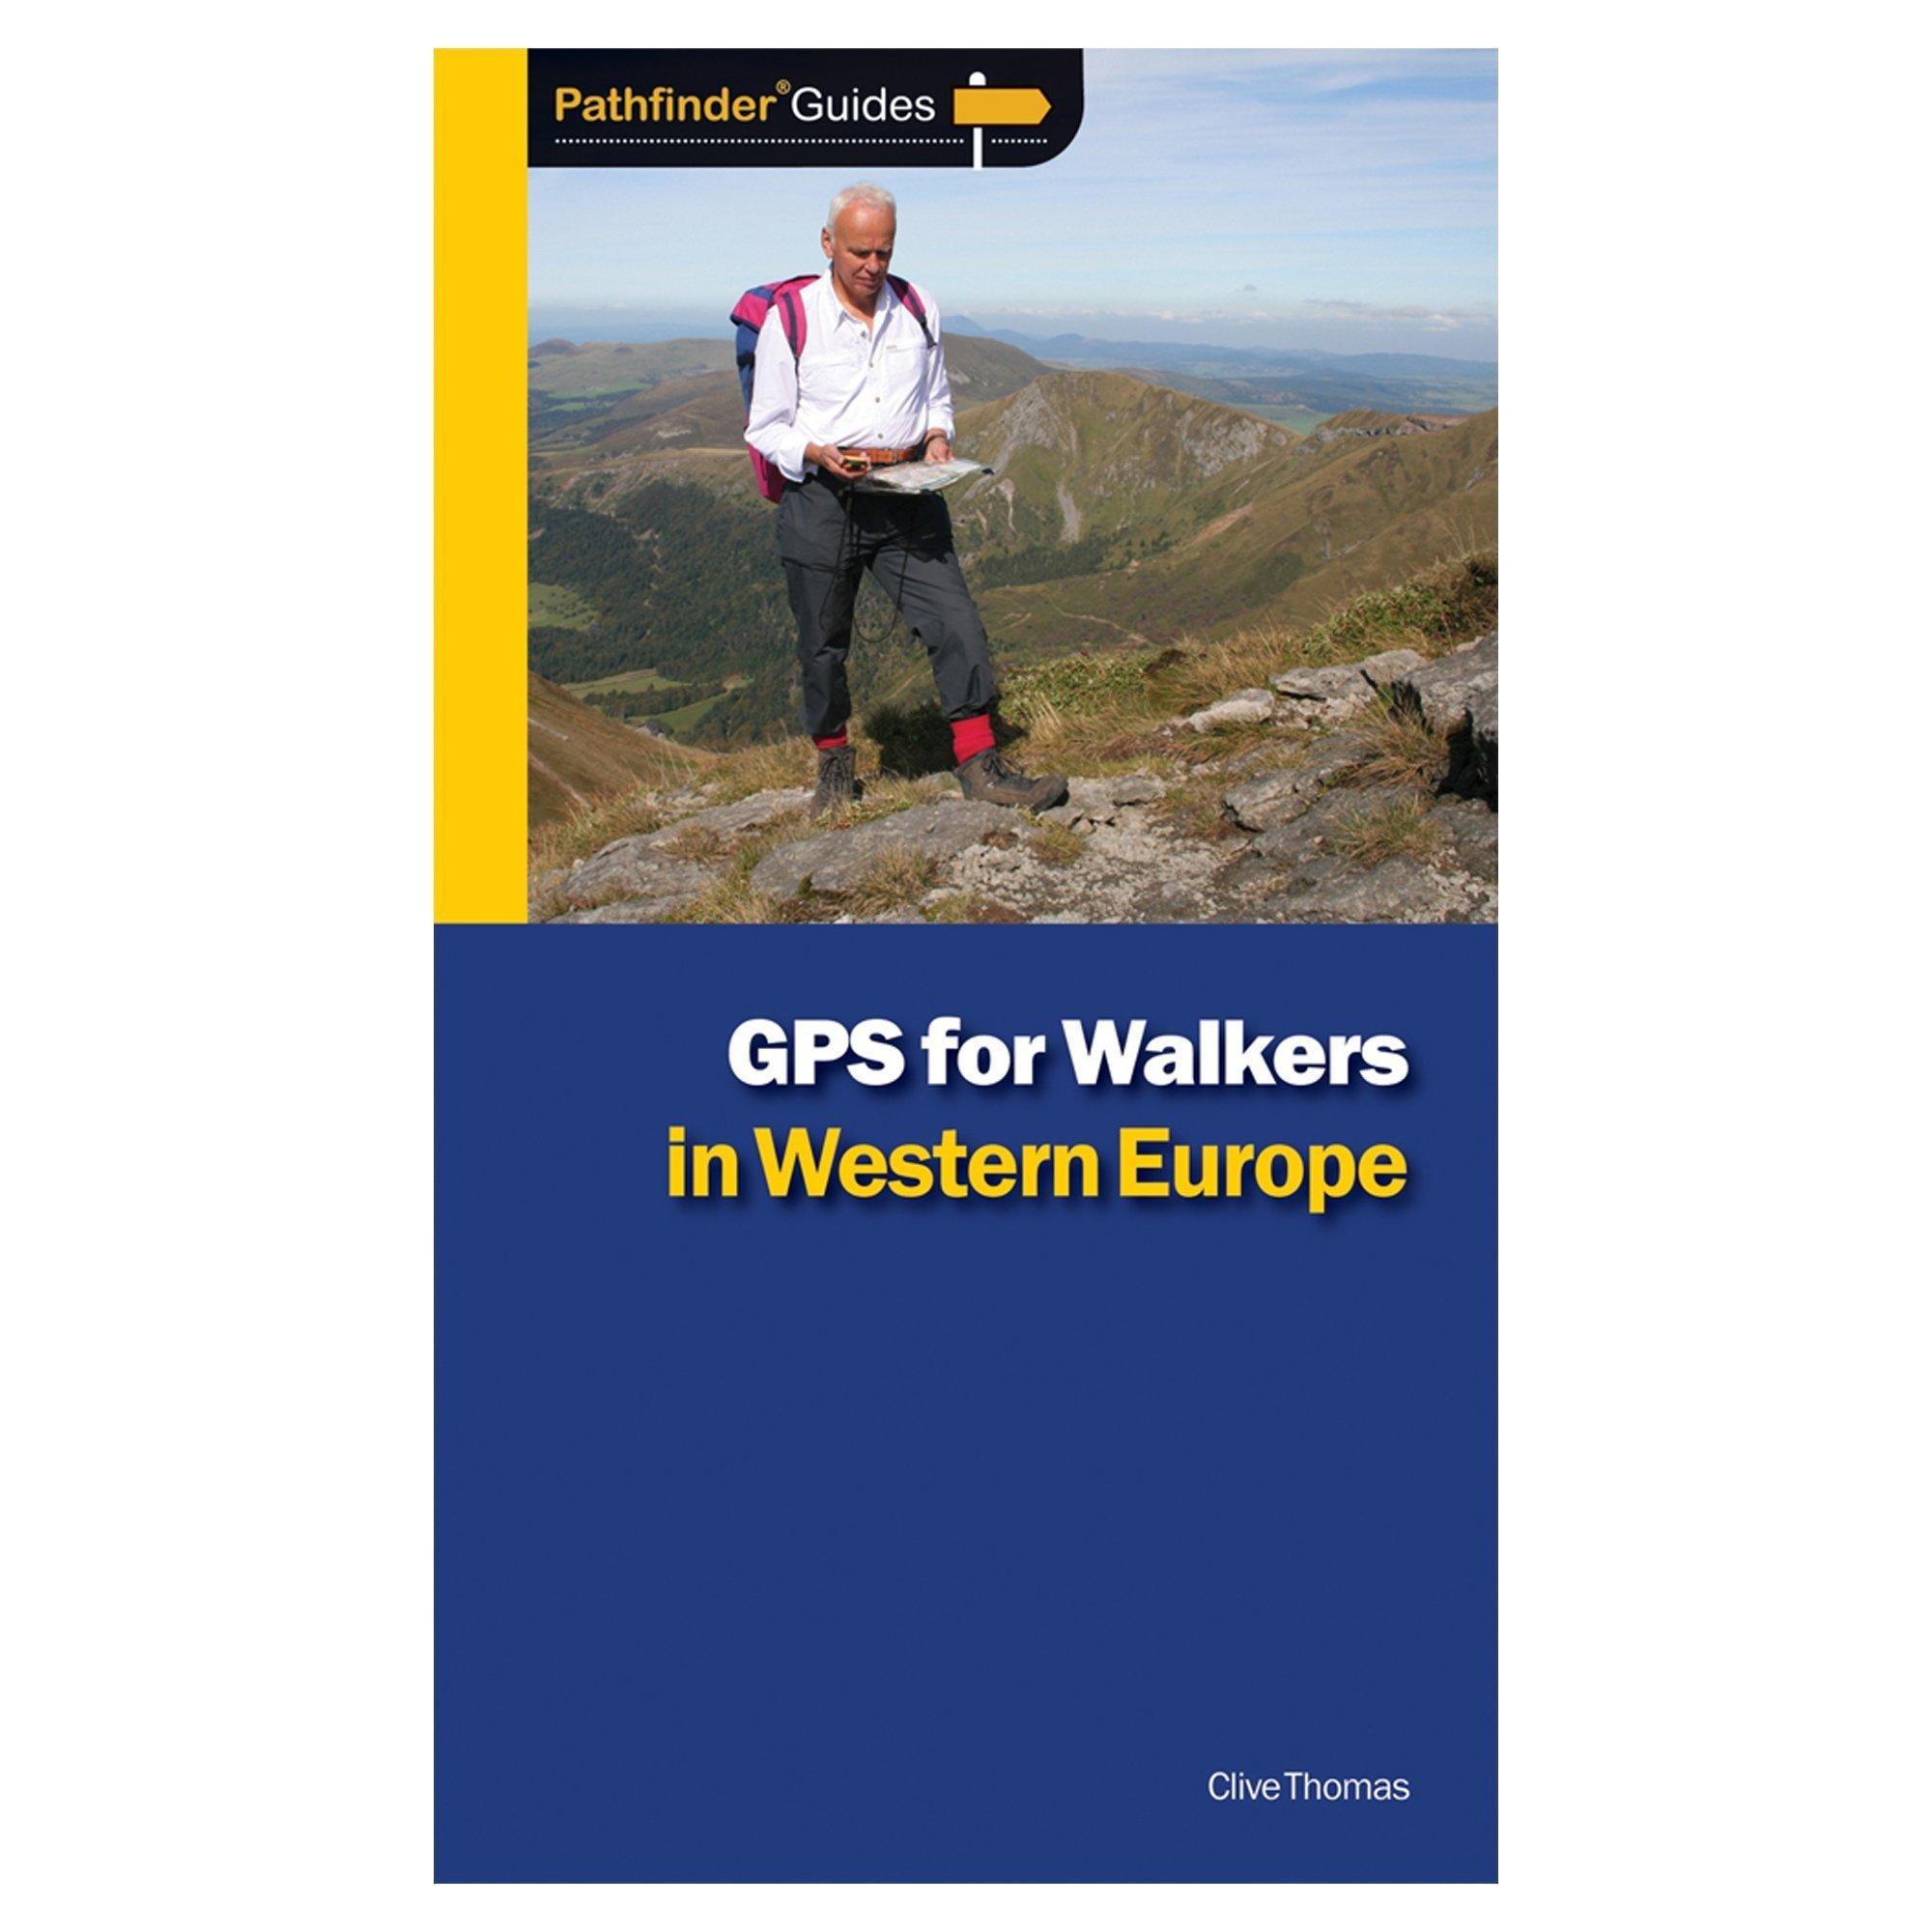 Pathfinder GPS FOR WALKERS IN WEST' EUR Review